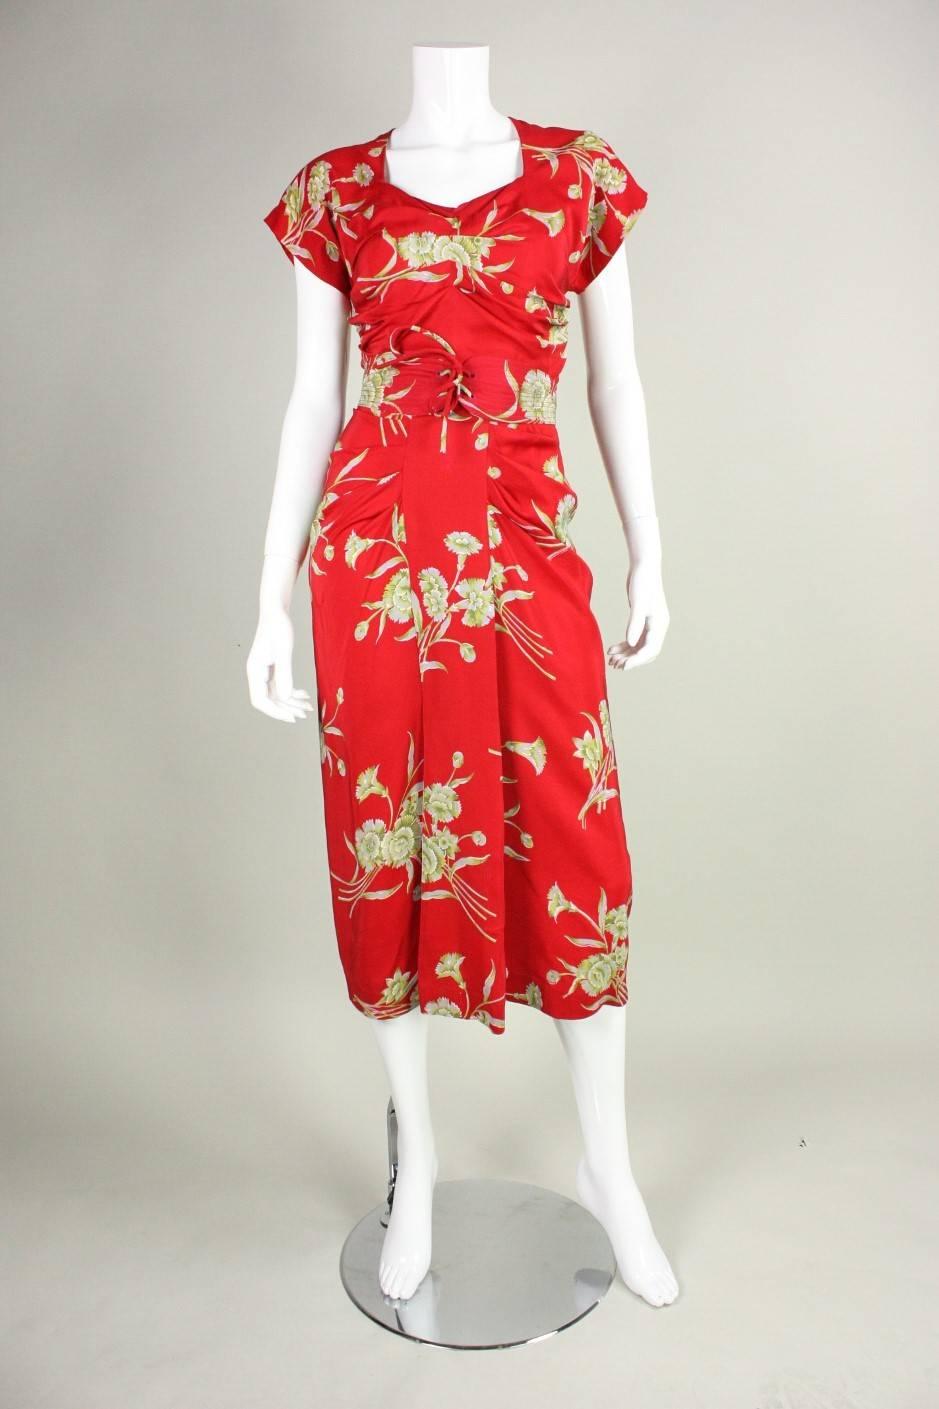 Vintage dress dates to the 1940's and is made of red silk with an allover floral print.  Center front bodice and hip feature wonderful ruched detailing.  Detached belt has concentric stitching and laces at the center front.  Mostly unlined.  Side